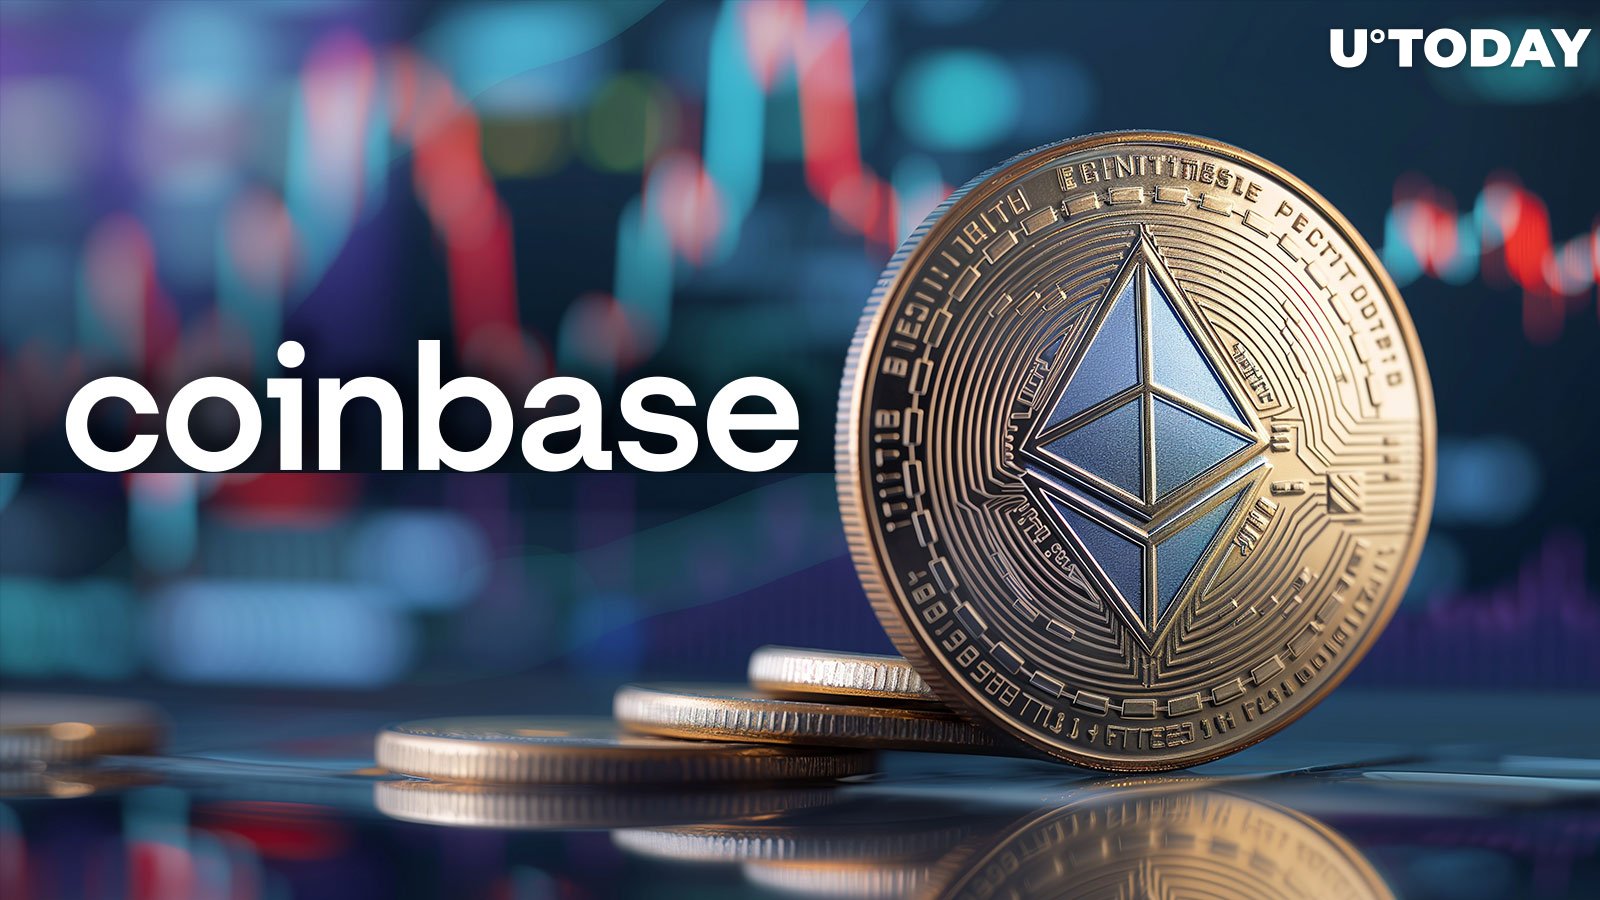 Coinbase Sees Over $1 Billion Ethereum Outflow - What's Happening?